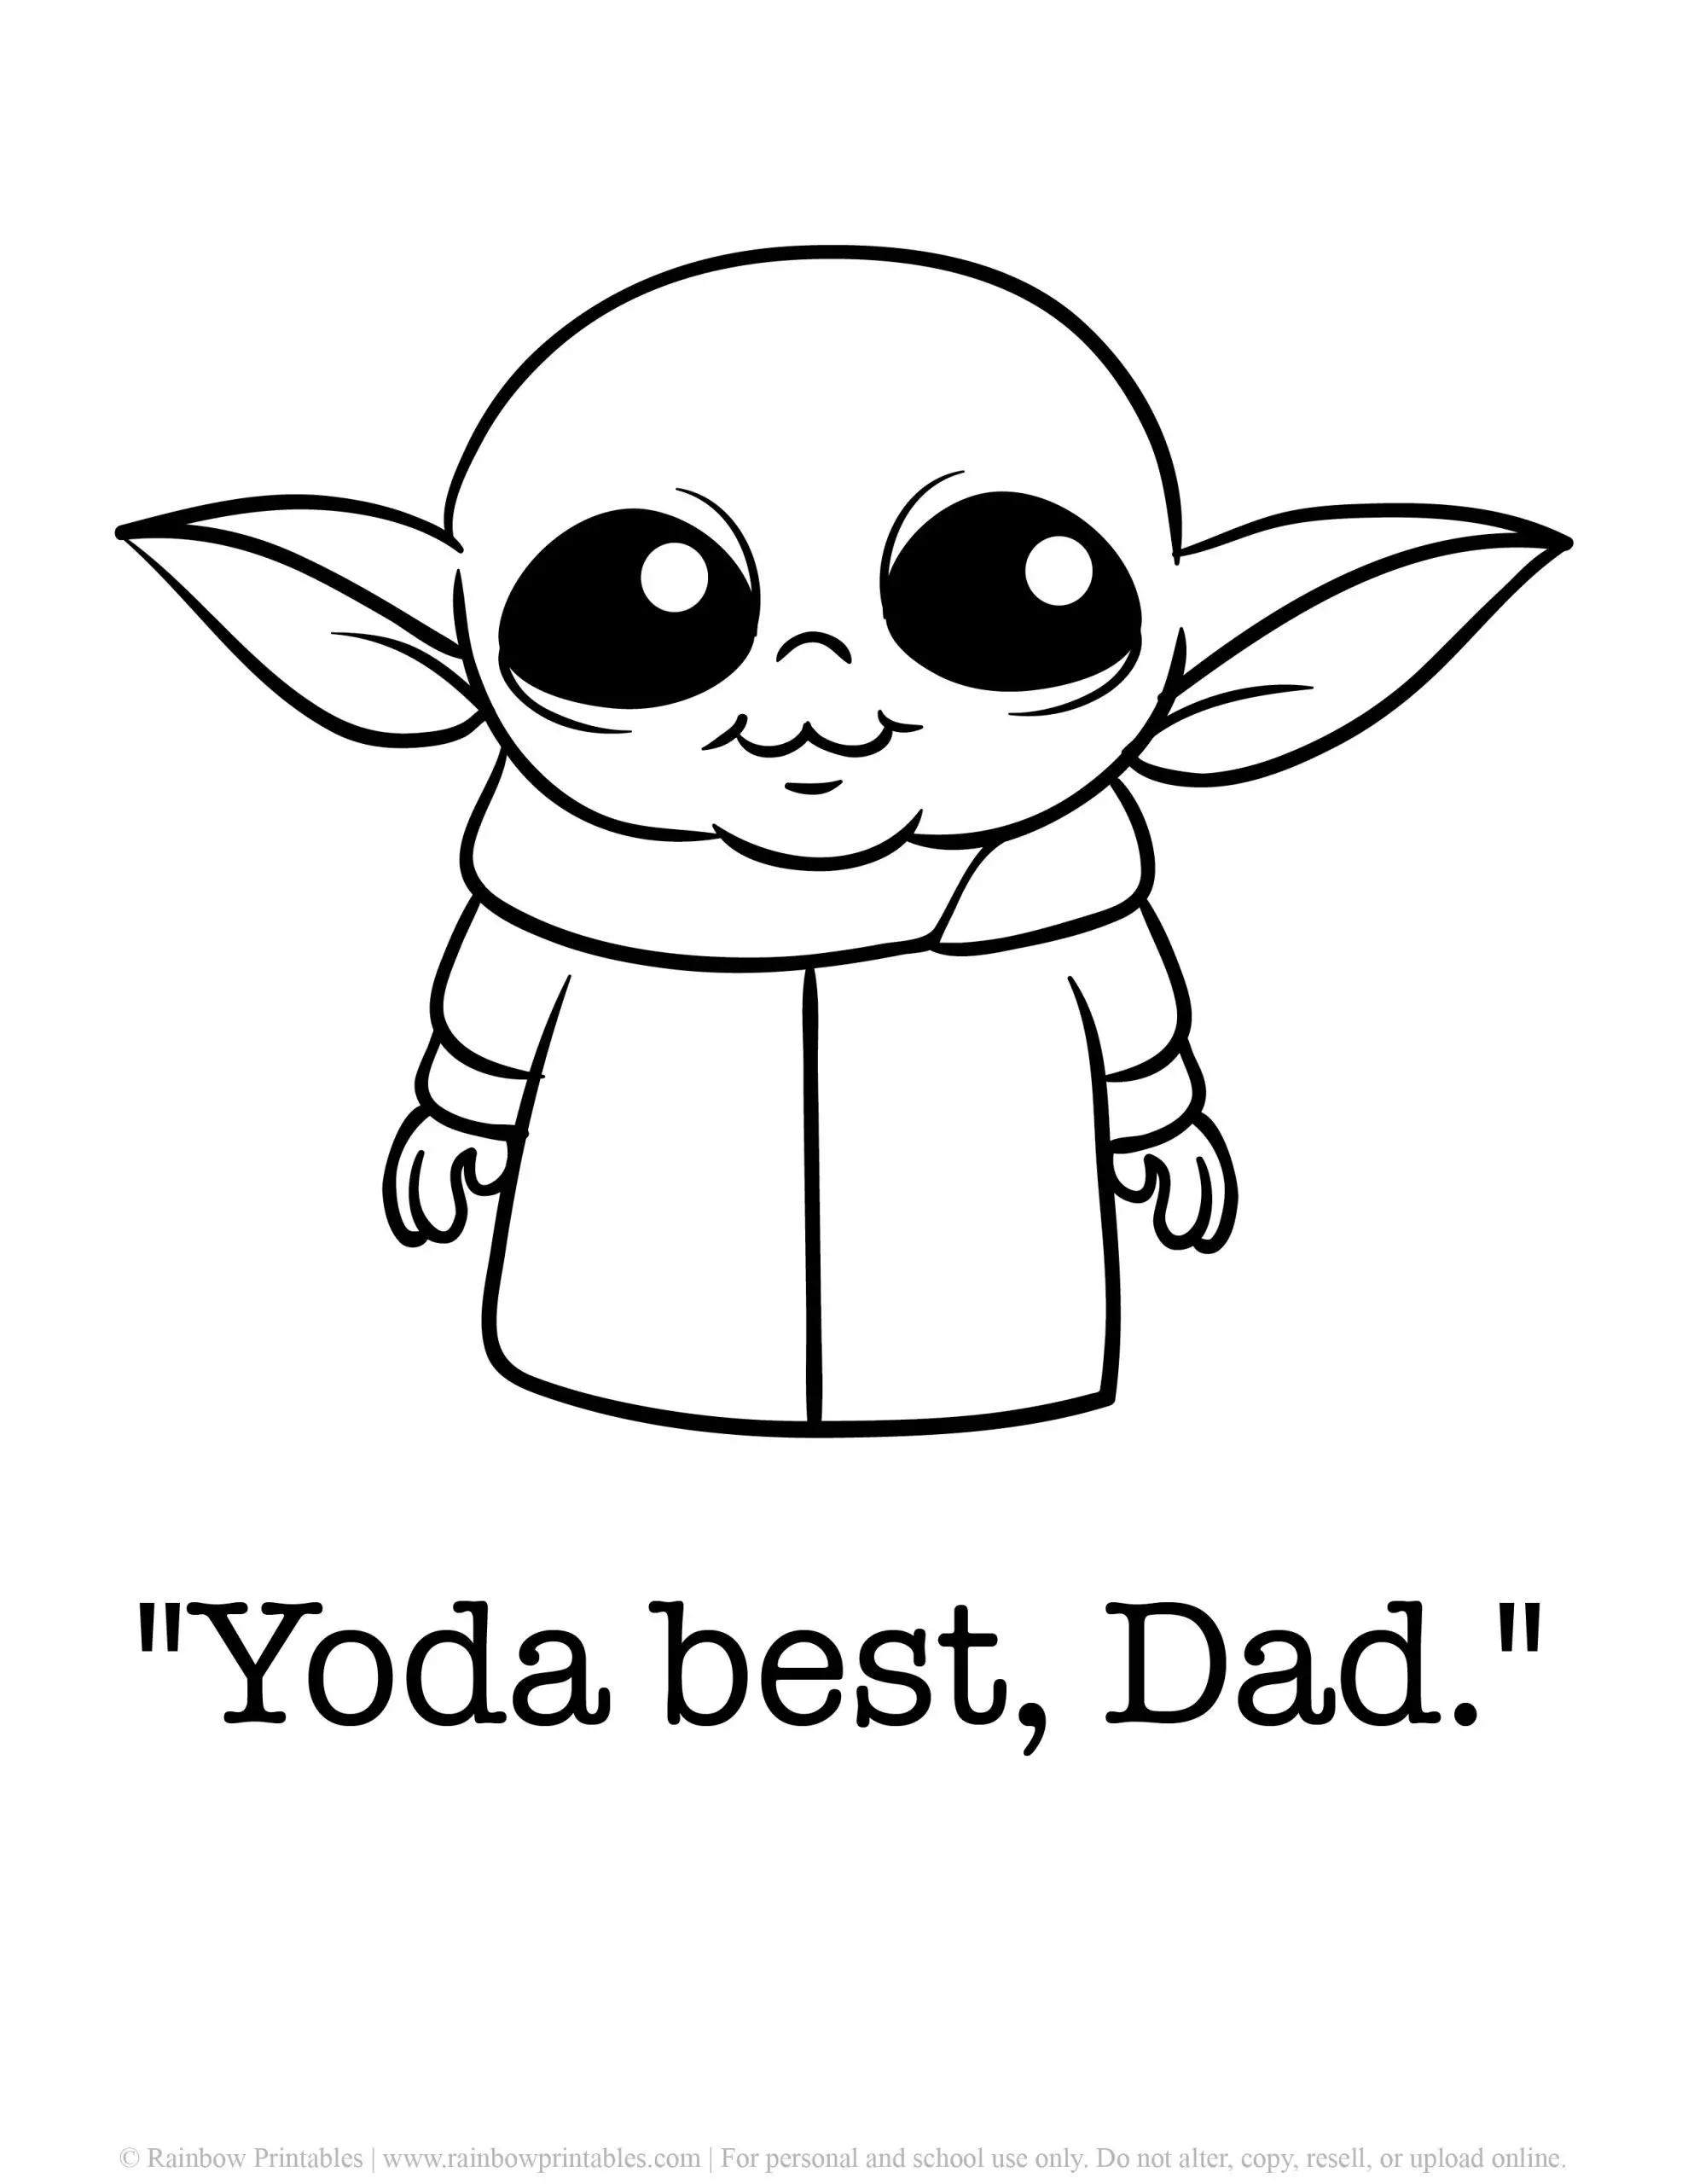 Cute Yoda Pun & Father's Day Punny Cards Coloring Pages Baby Yoda Star Wars Pop Culture Happy Father's Day Alien Printable